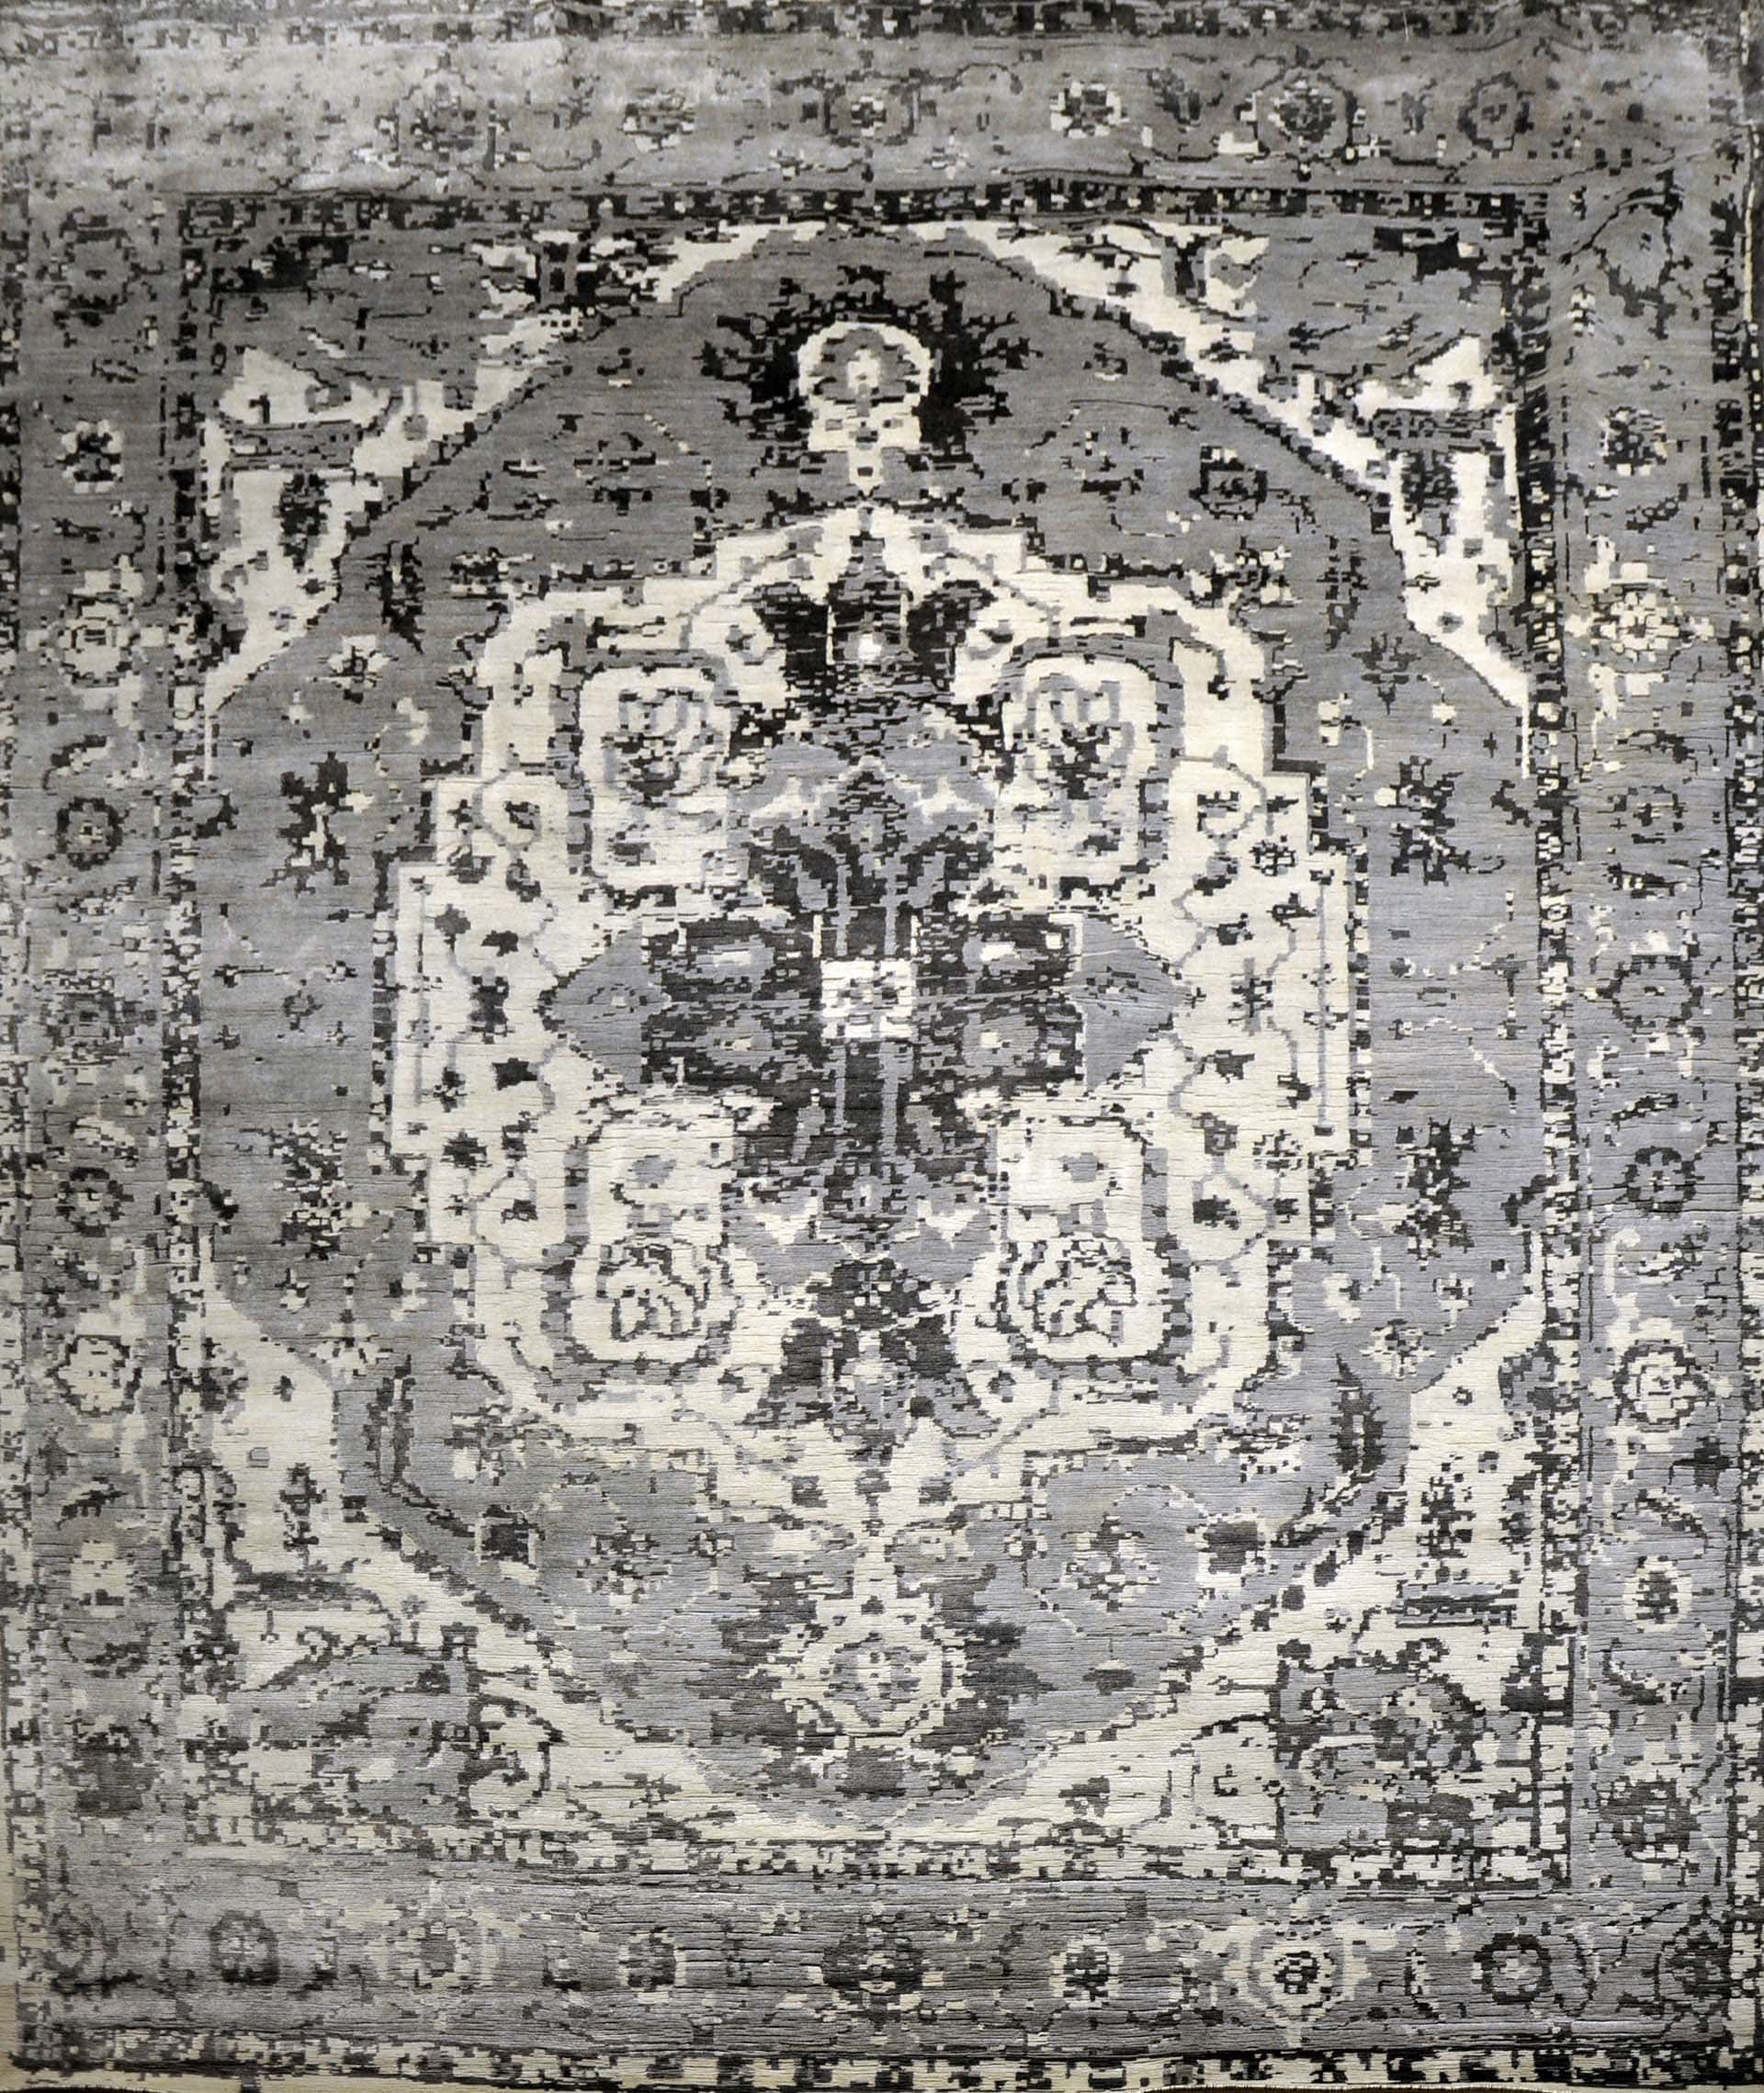 A 'Benmore' artisanal rug from Source Mondial, one of our Style Safari destinations. 